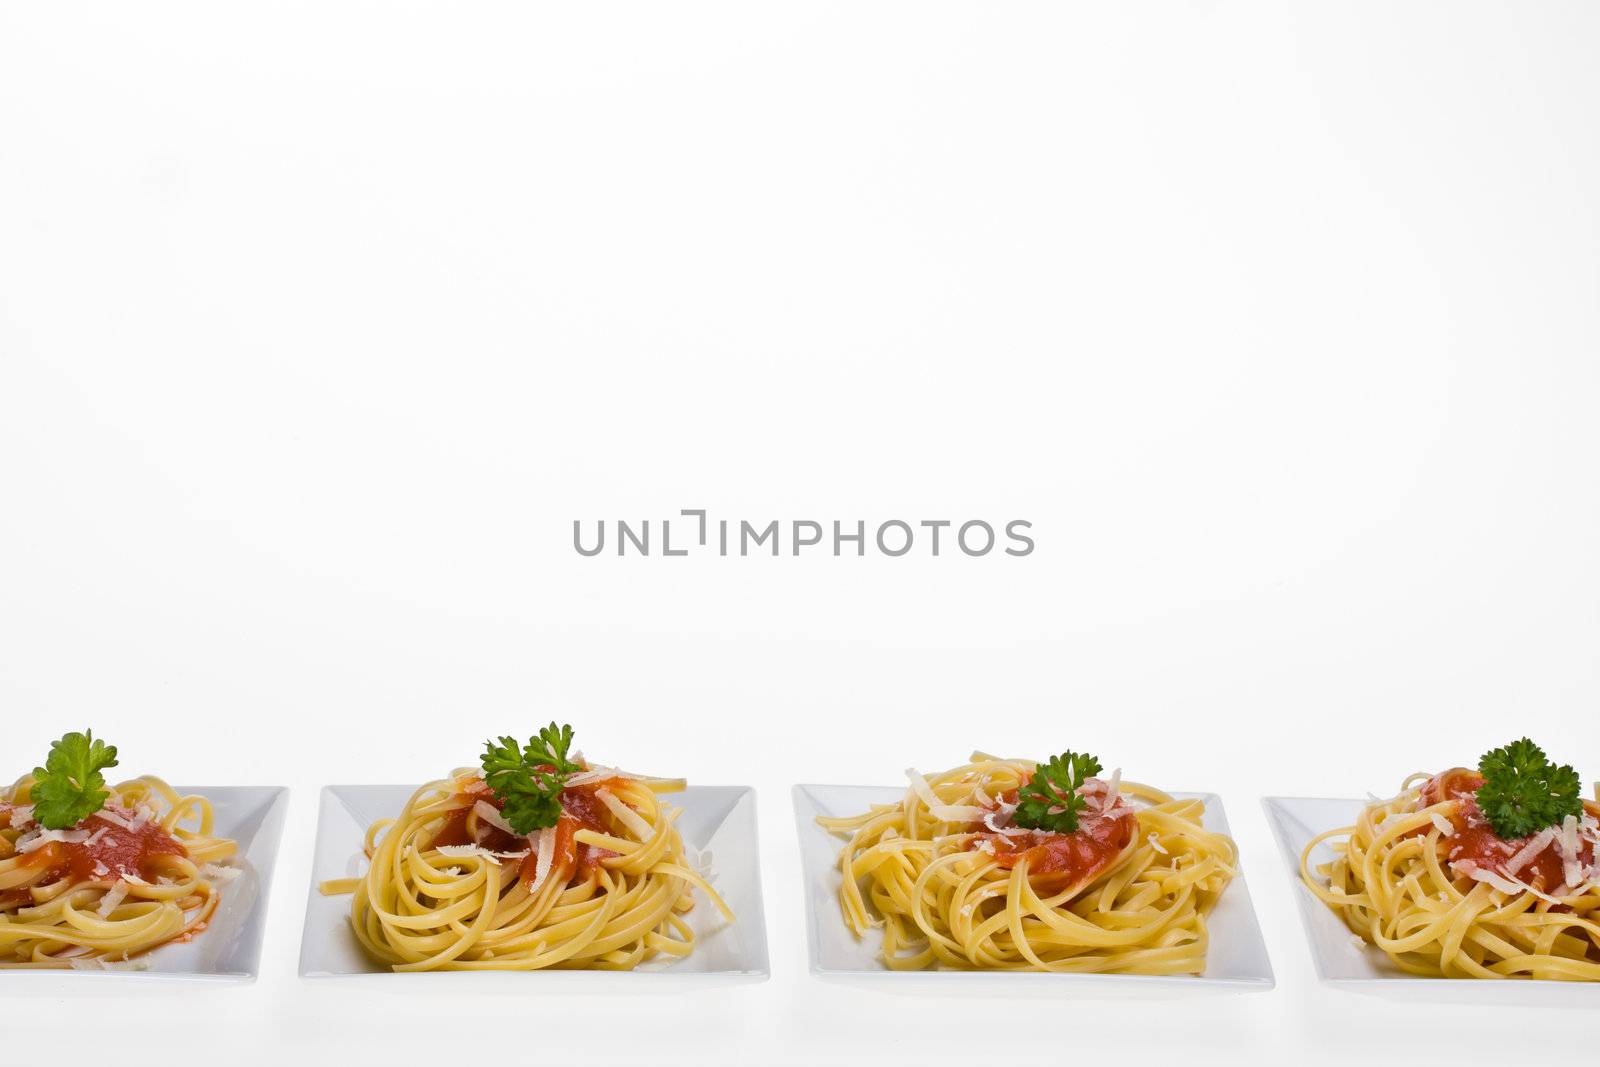 tagliatelle with tomato sauce by bernjuer